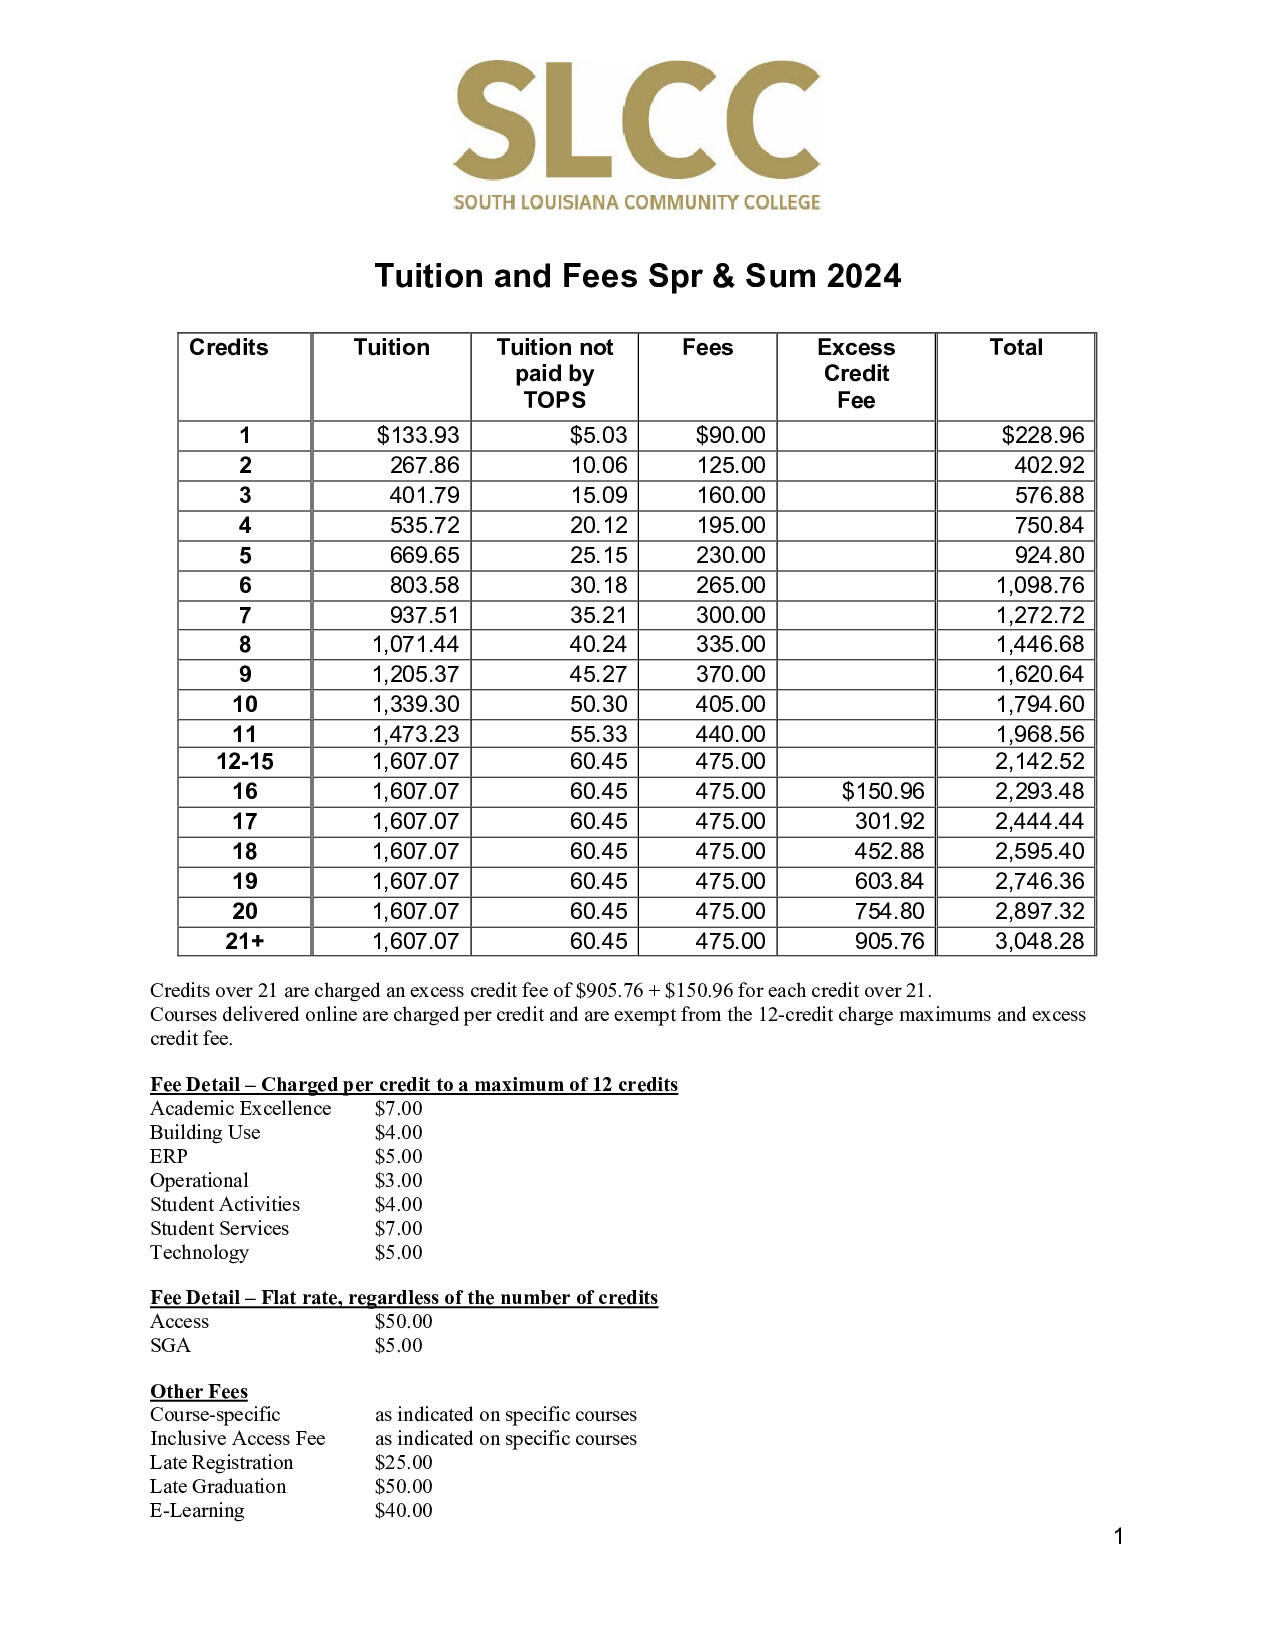 Tuition and Fees 2023-24 schedule (opens in new window)